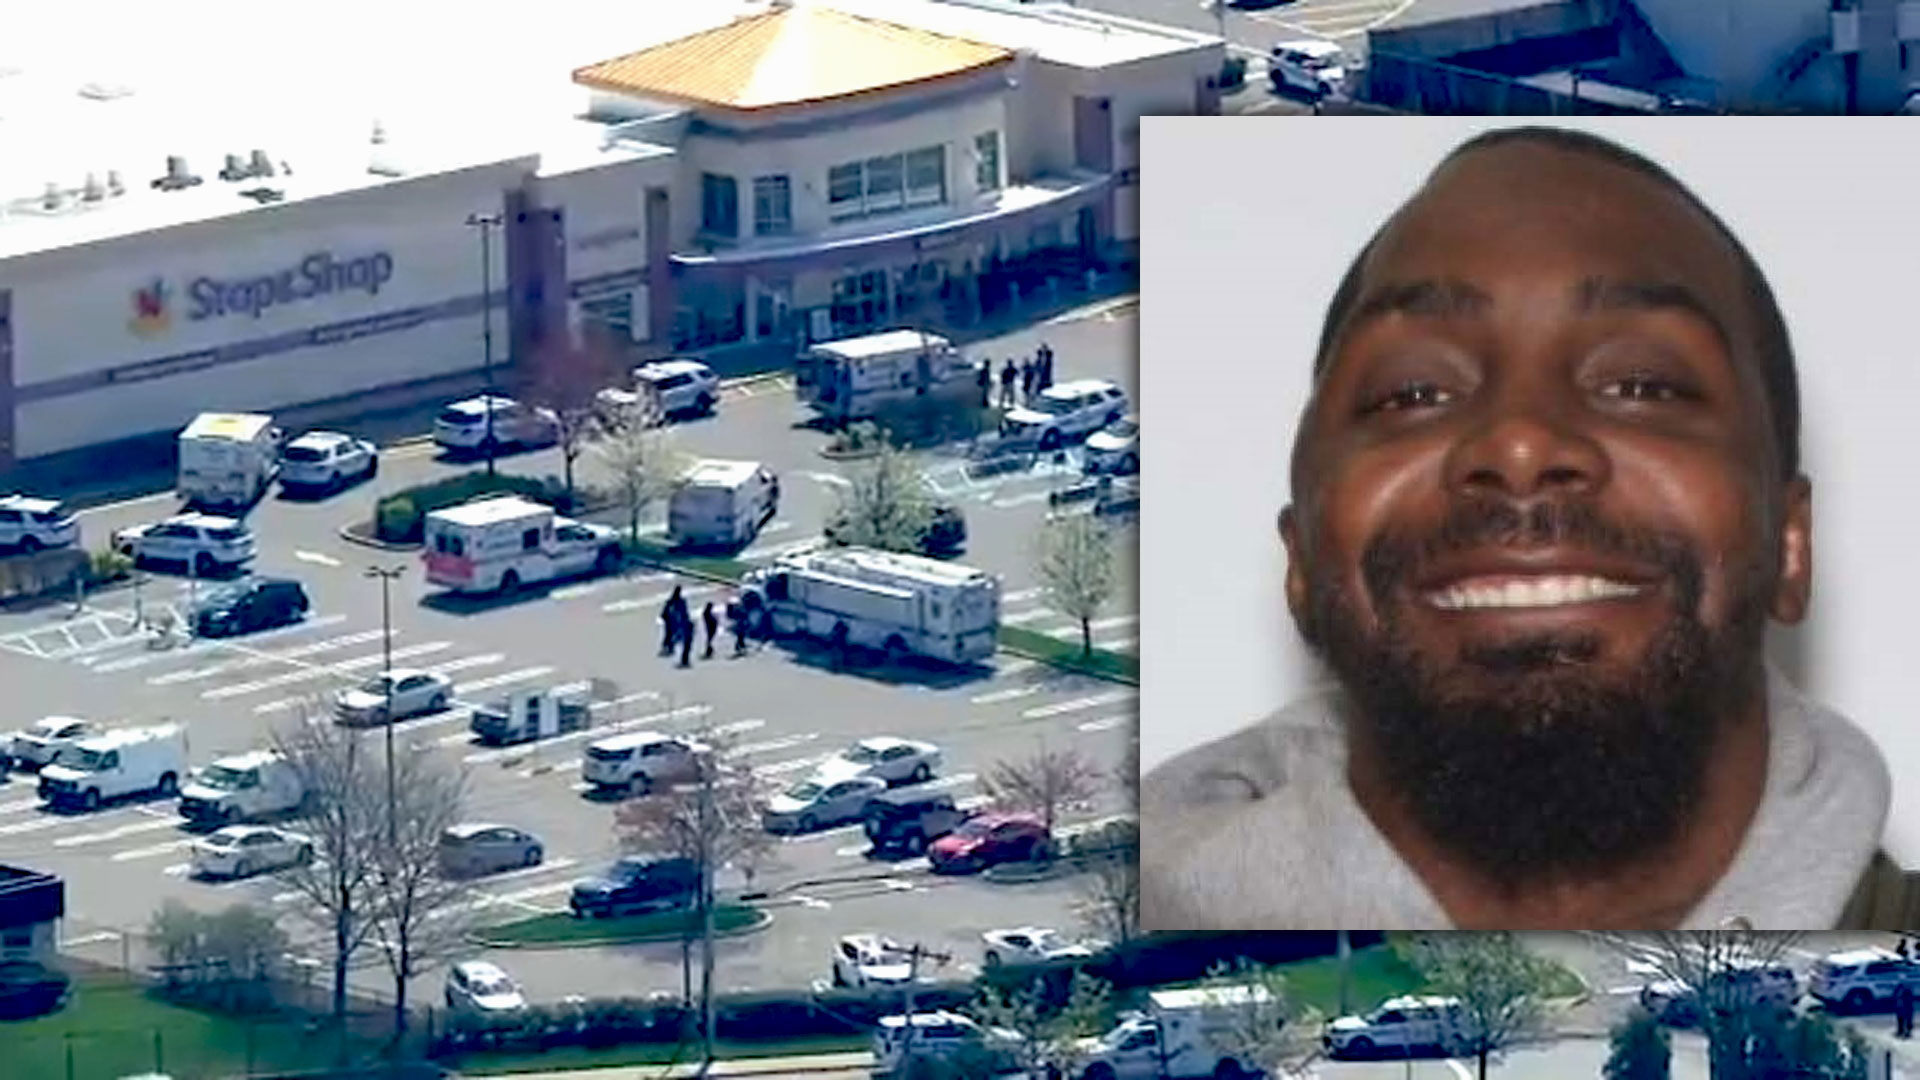 Suspect in custody after deadly supermarket shooting on Long Island